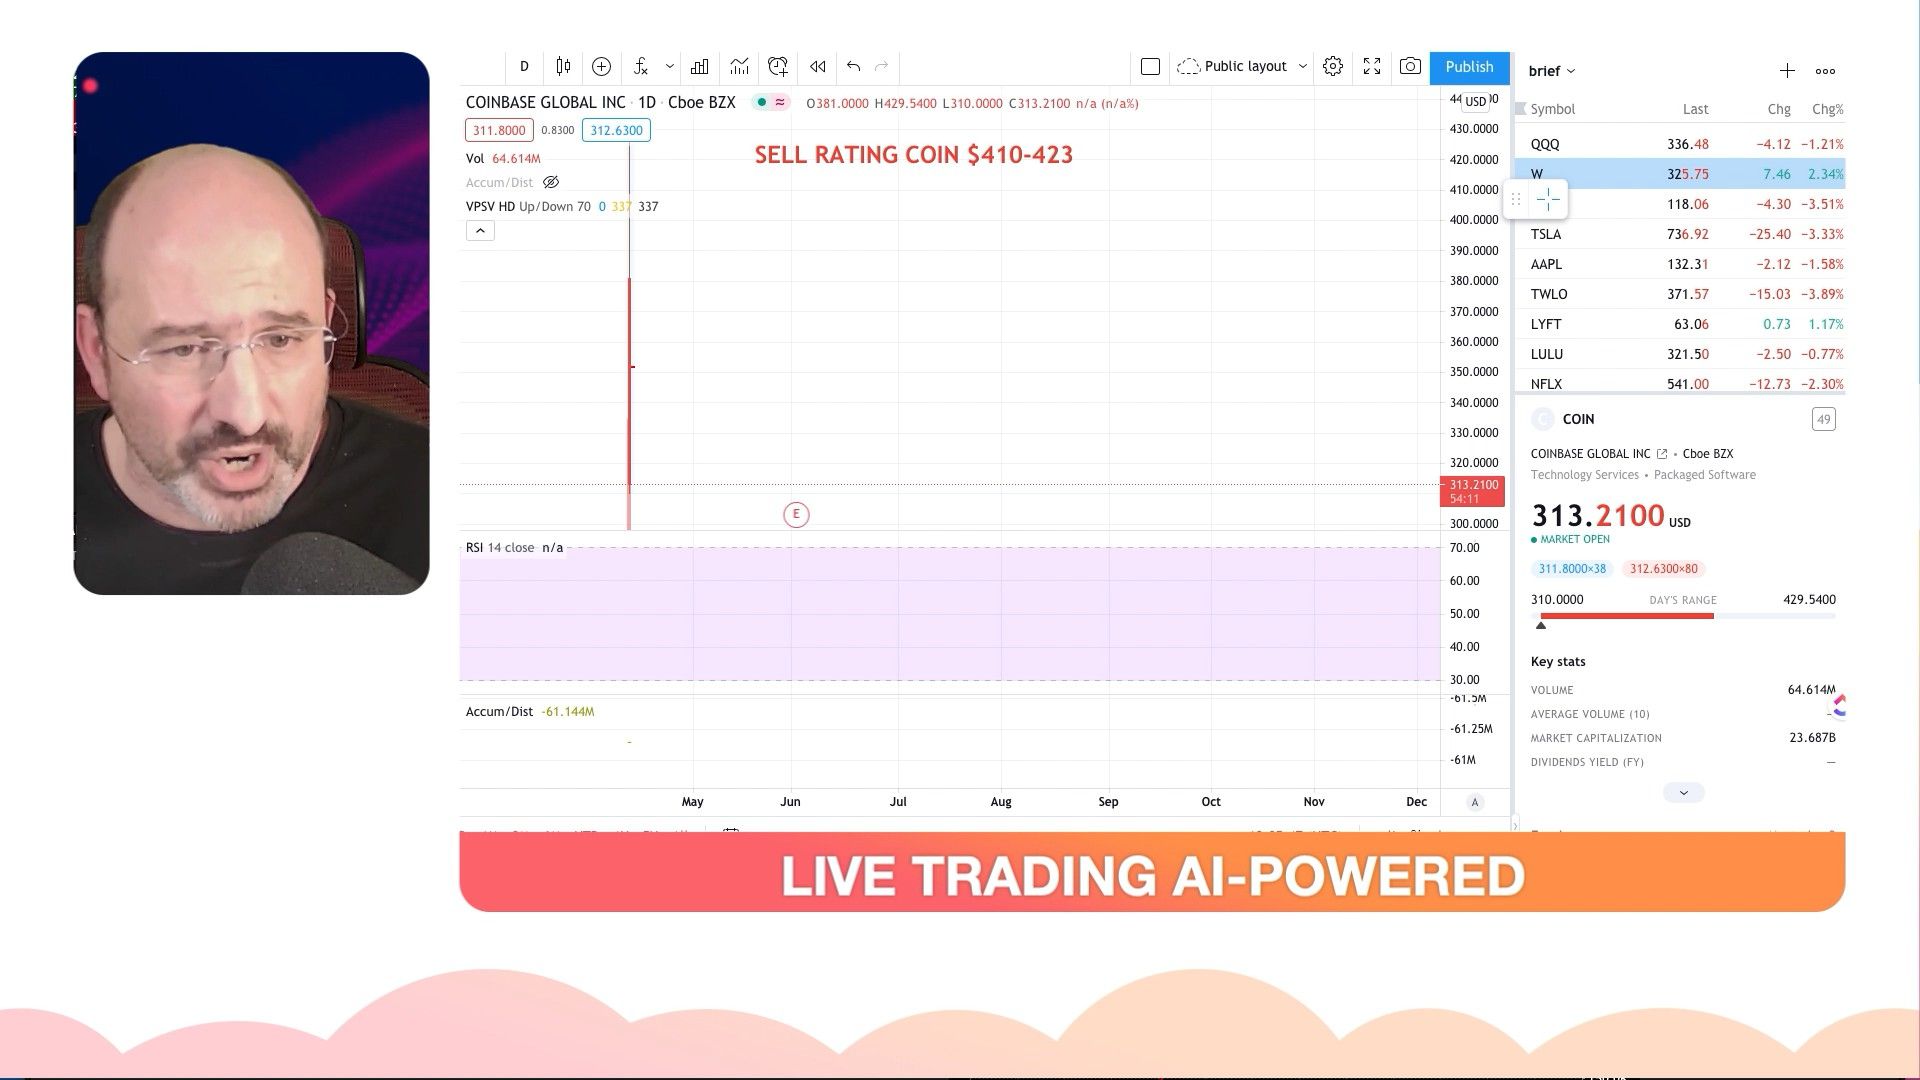 Market Genius Live on Coinbase IPO. Trade Signals and Price Predictions to Make 10 Million.